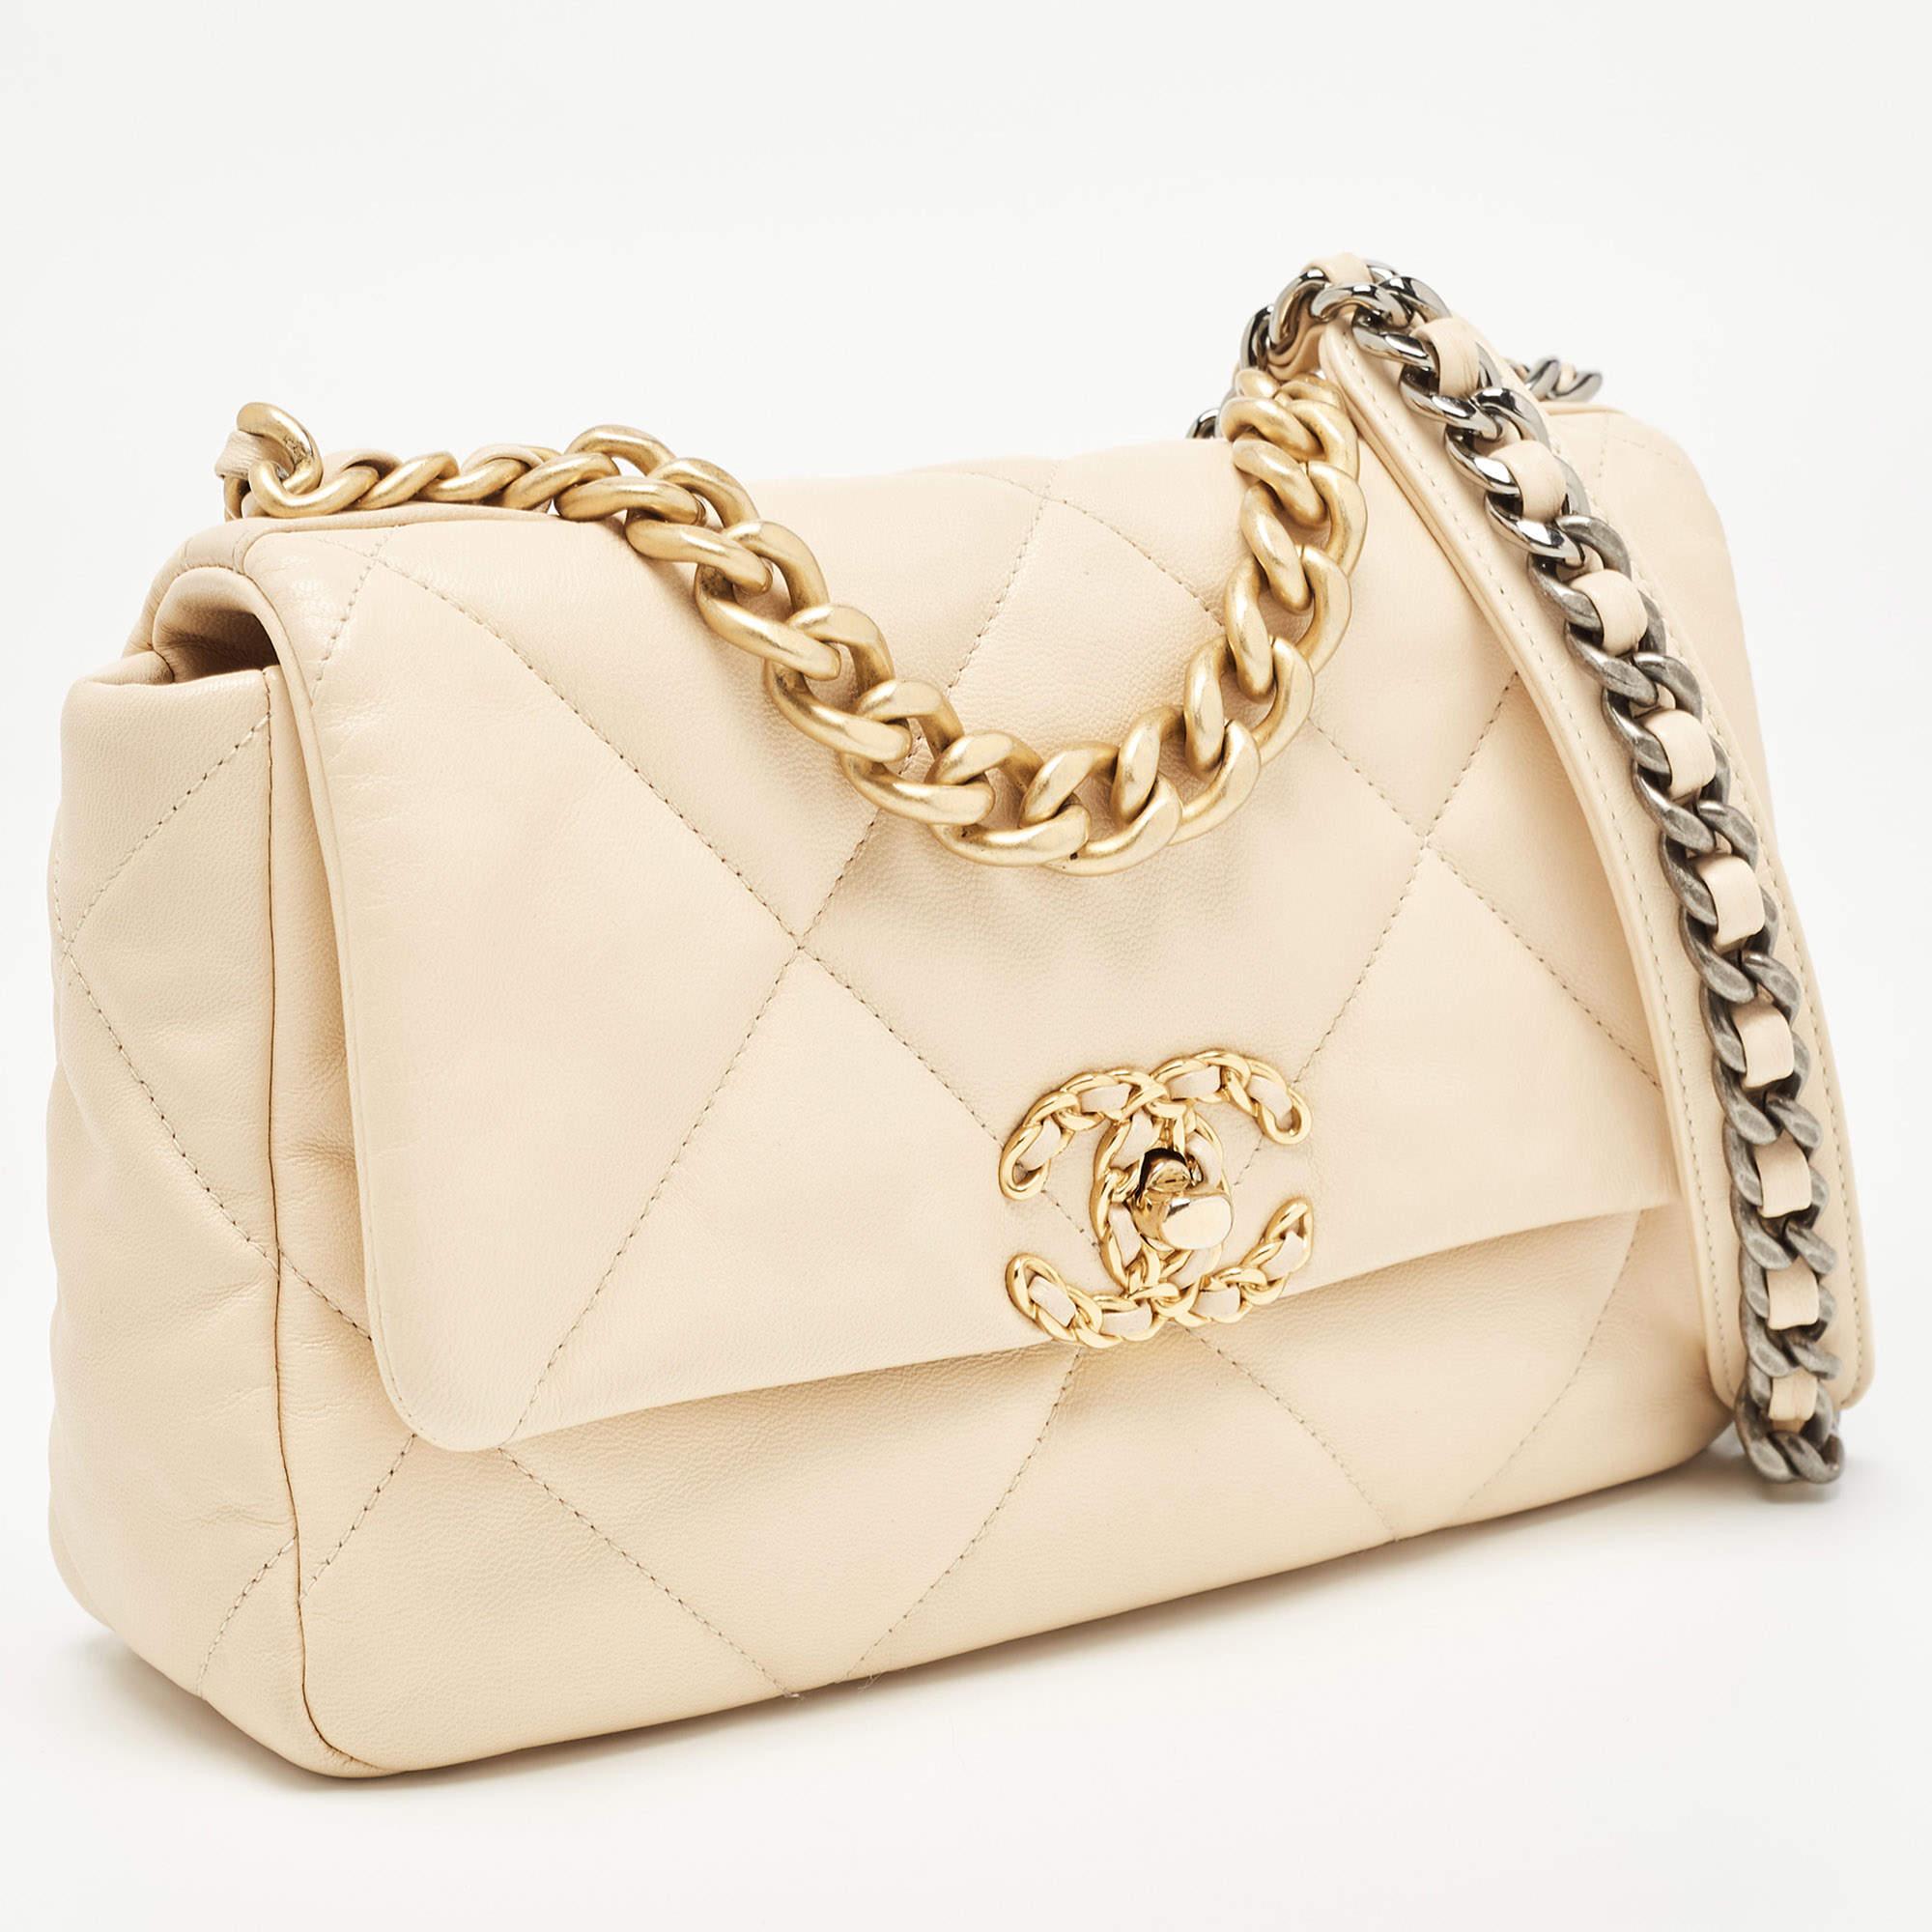 Perfect for conveniently housing your essentials in one place, this authentic Chanel 19 flap bag is a worthy investment. It has notable details and offers a look of luxury.

